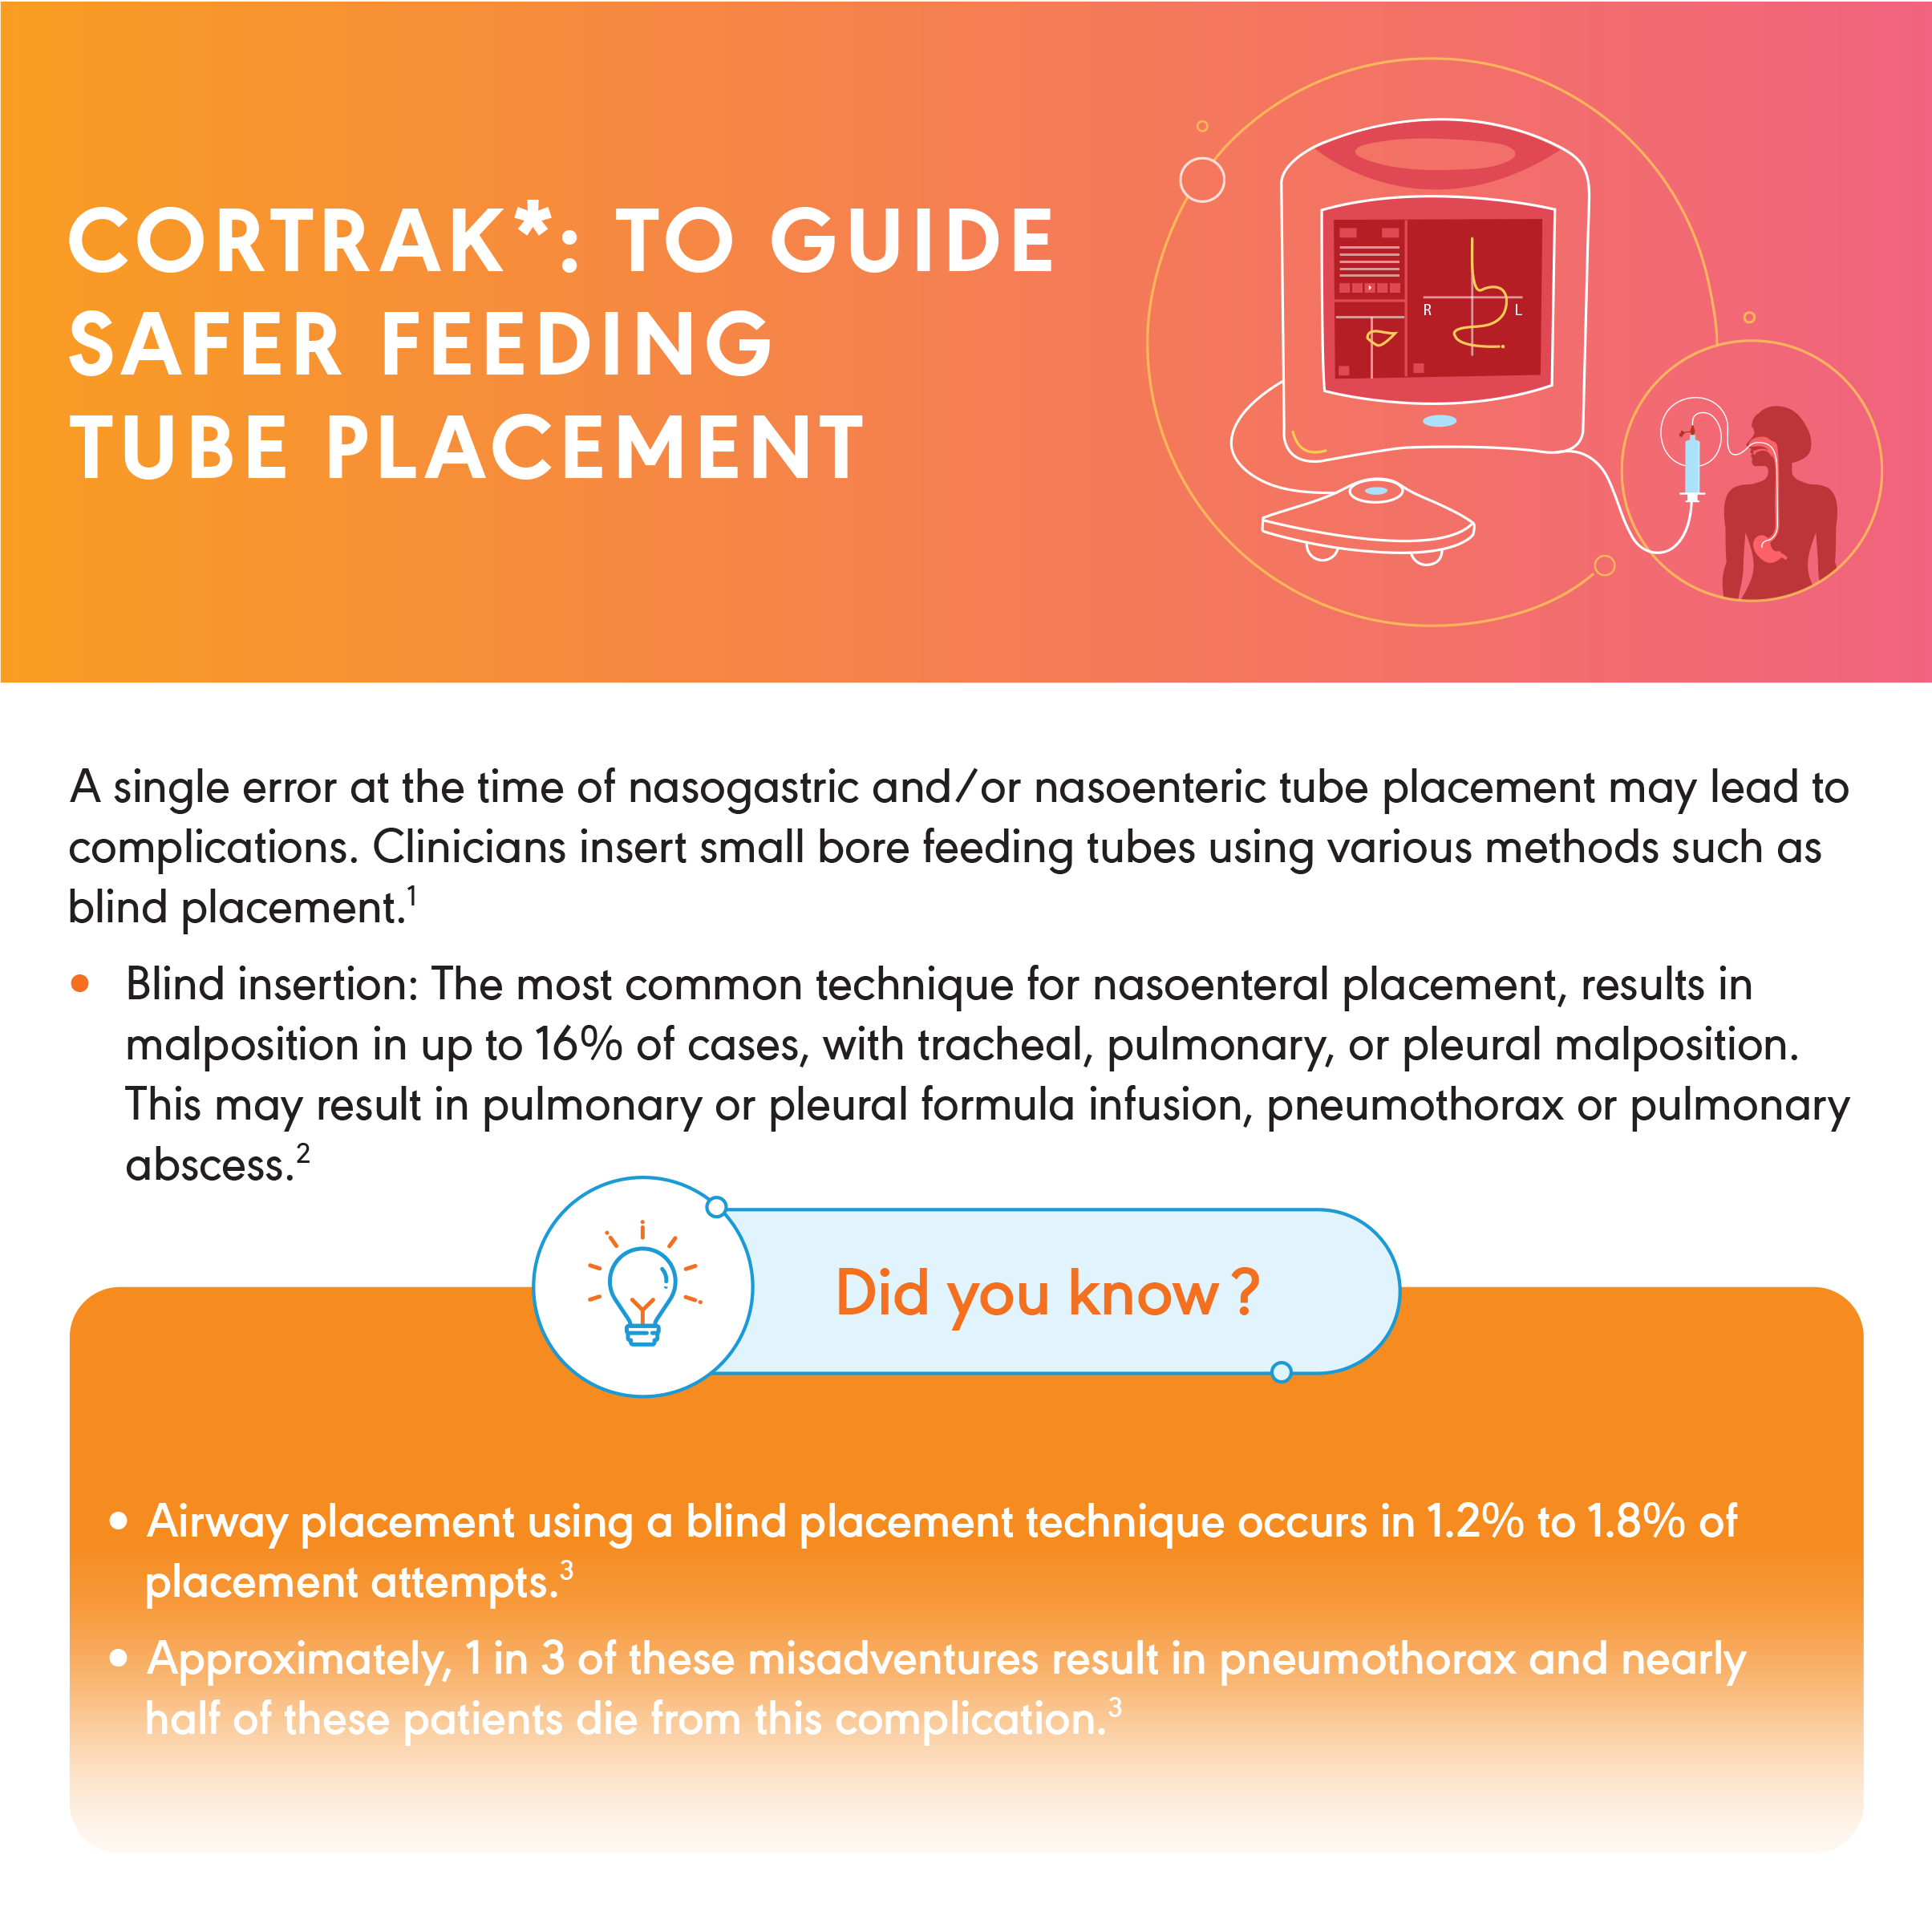 Cortrak: To Guide Safer Feeding Tube Placement